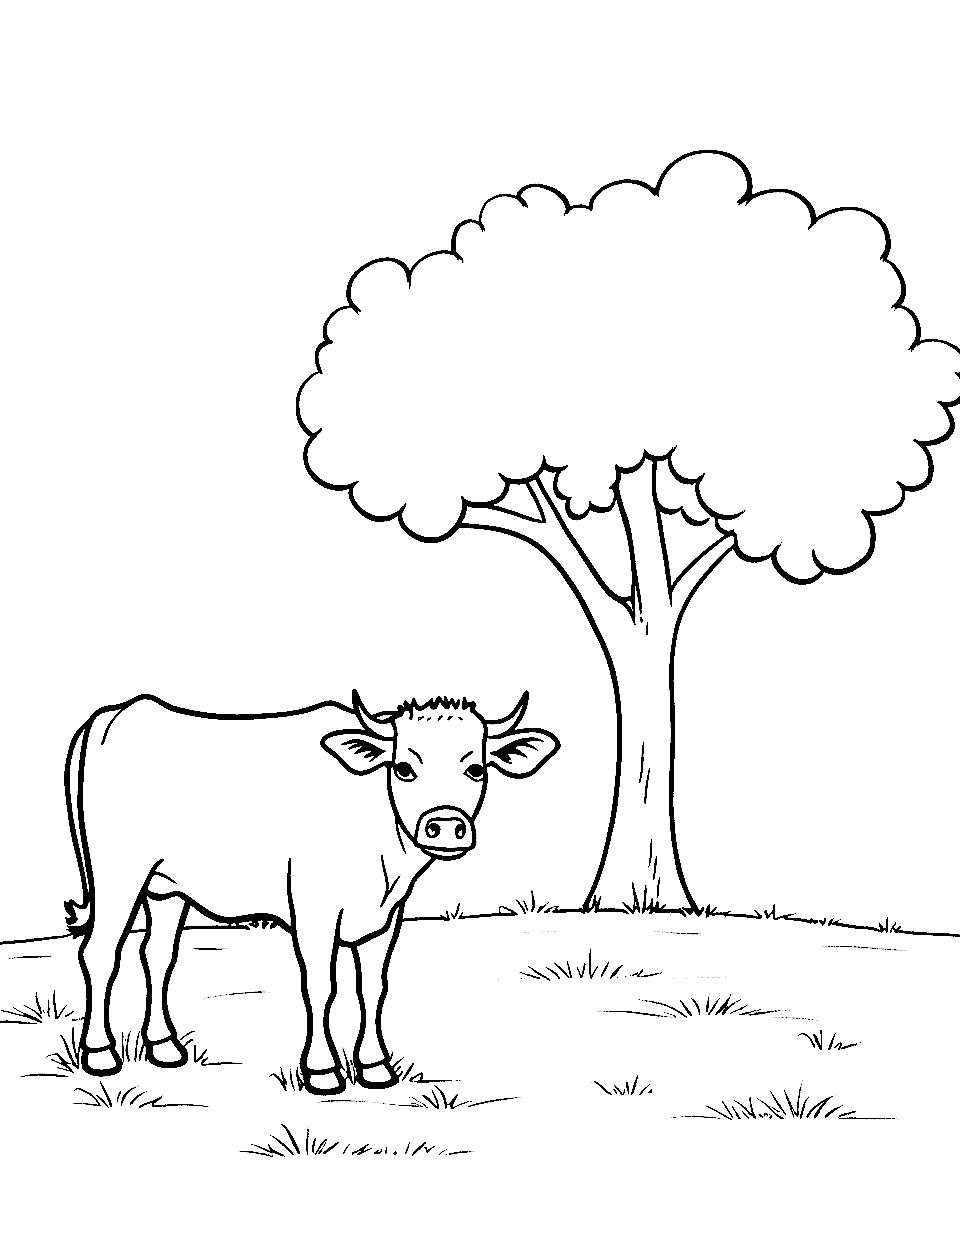 Cow in a Clear Field Coloring Page - A lone cow serenely grazing in a clear field with a single tree in the backdrop.